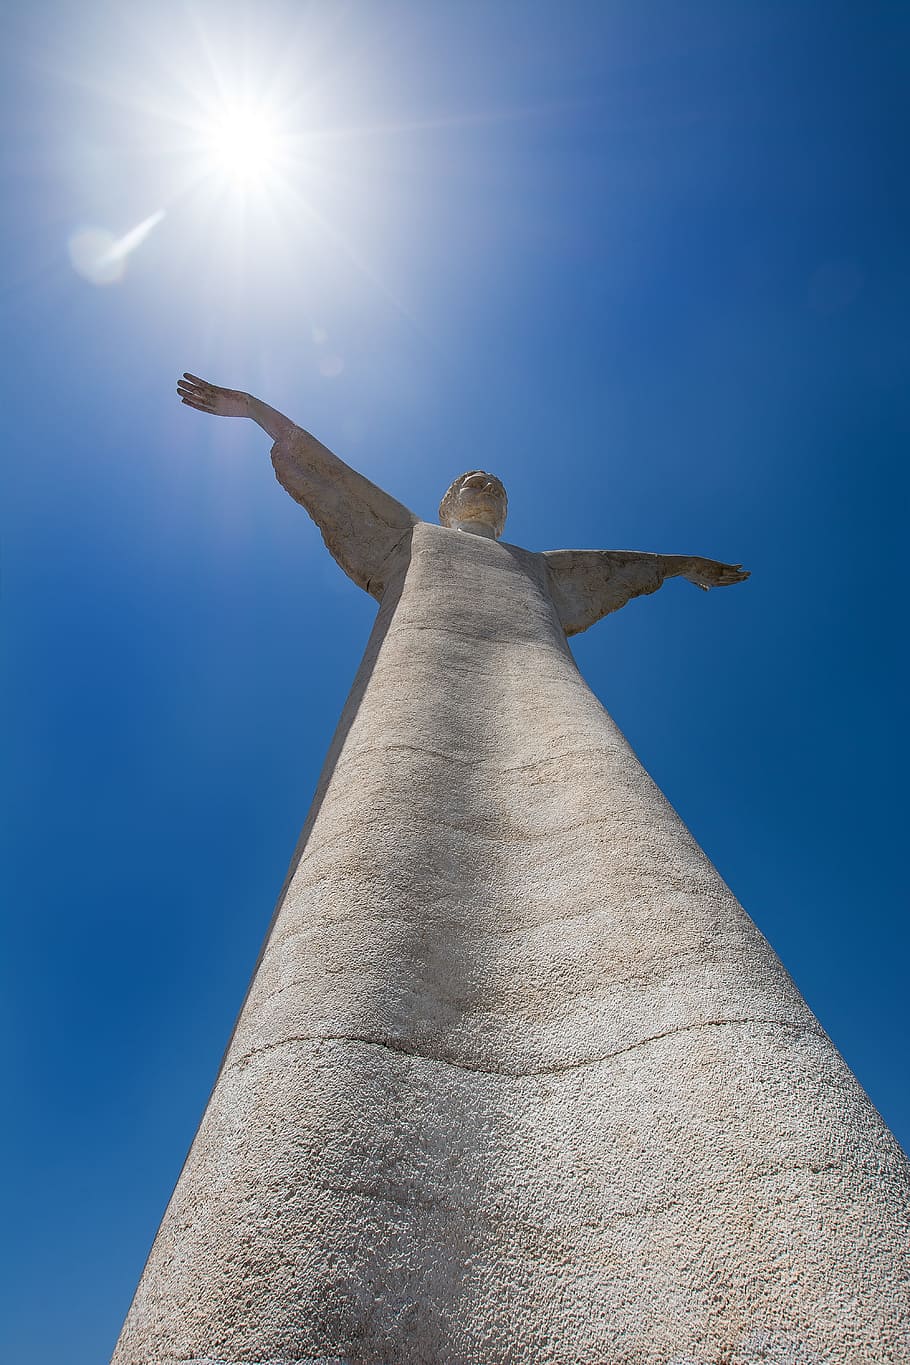 the statue of, the statue, sculpture, italy, architecture, jesus, sky, sunlight, low angle view, blue